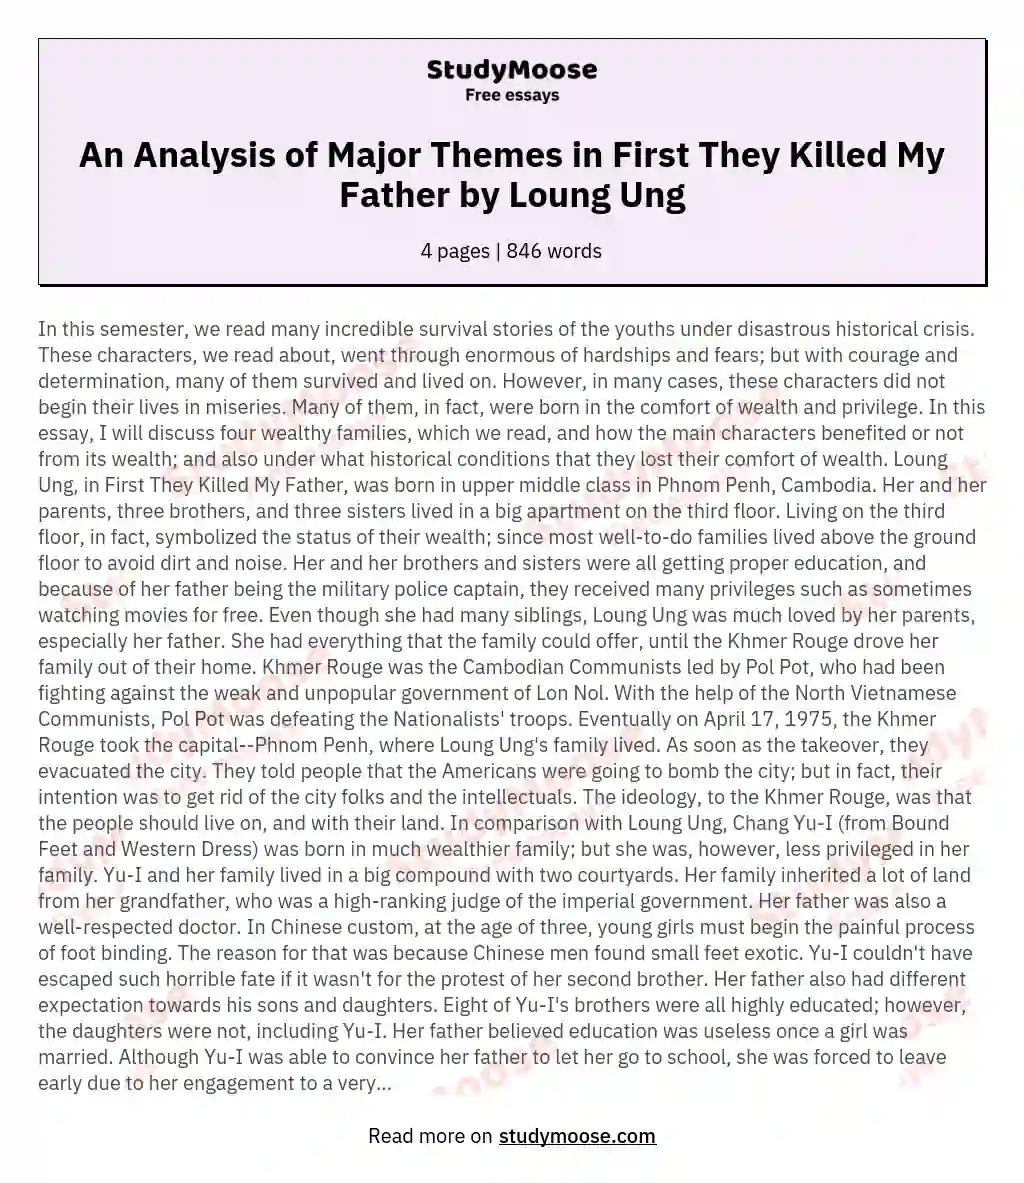 An Analysis of Major Themes in First They Killed My Father by Loung Ung essay